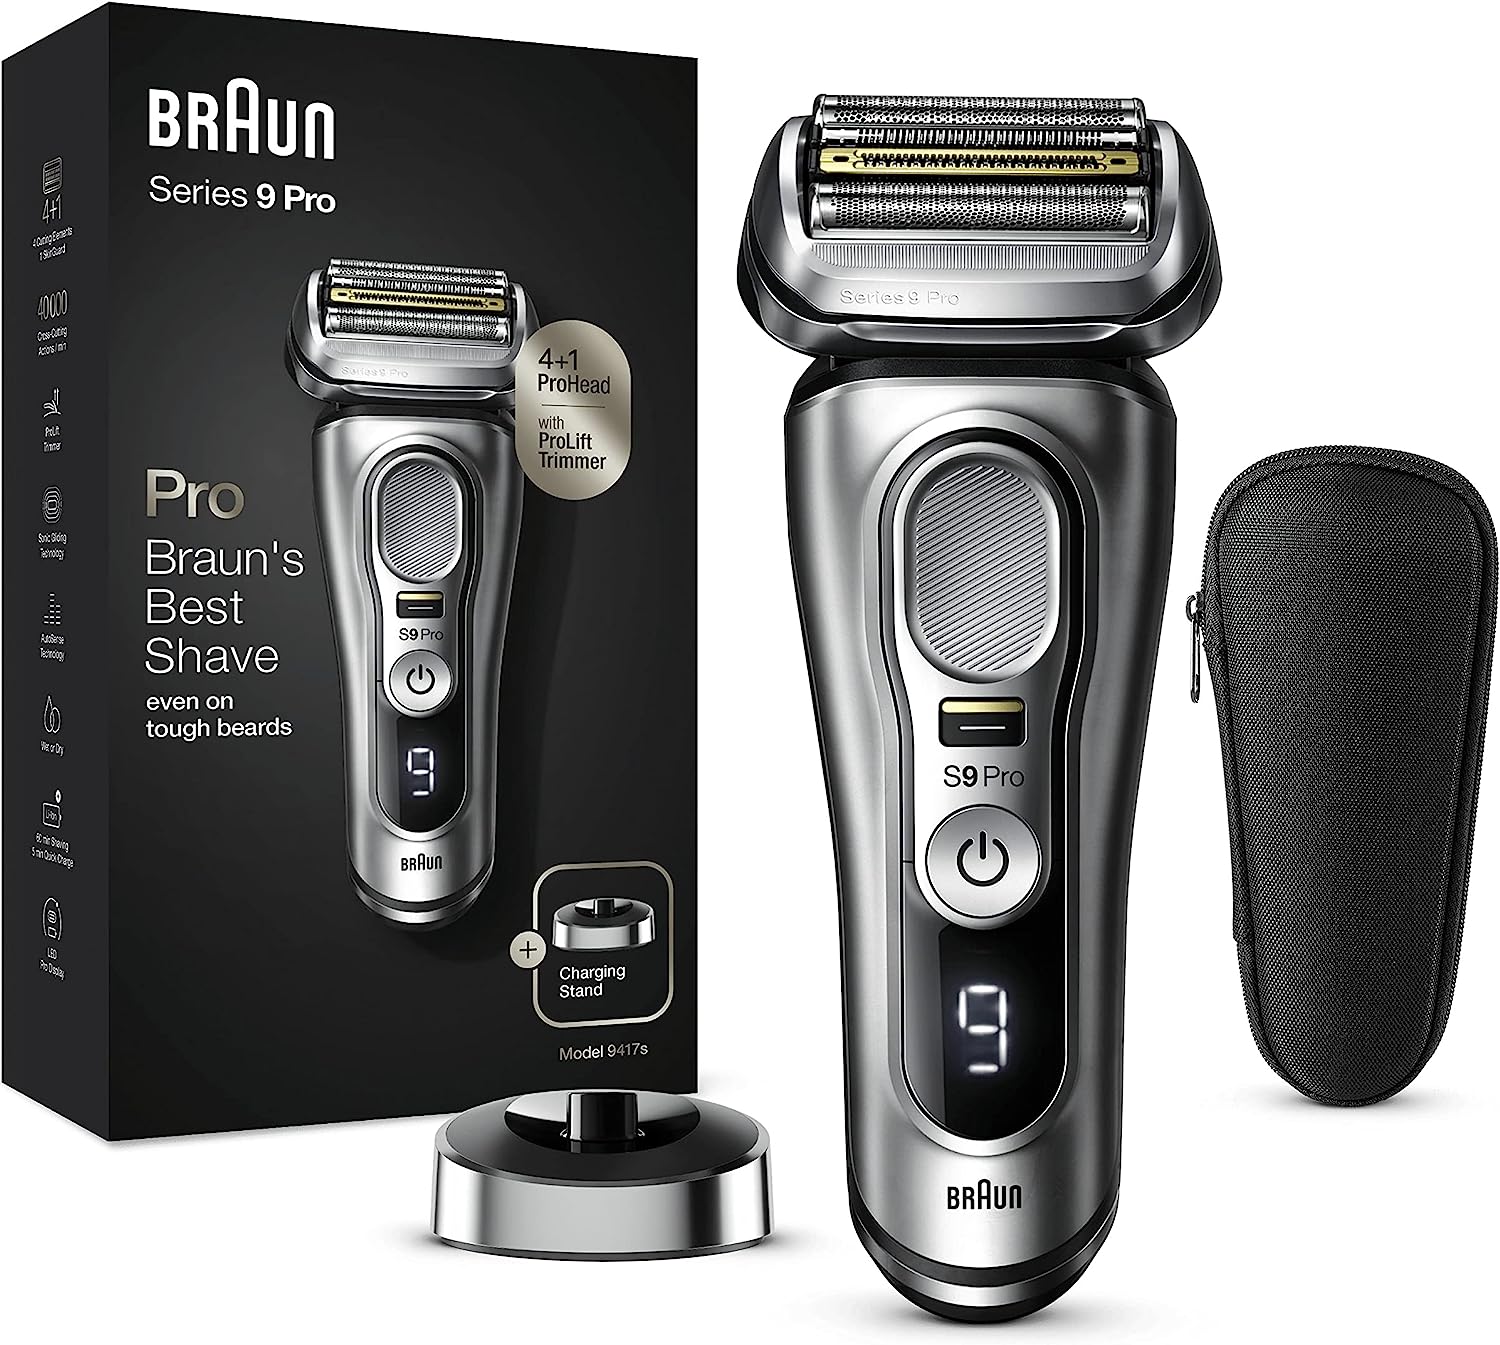 Braun Series 9 Pro+ Review: An Honest Opinion After 1 Month of Testing